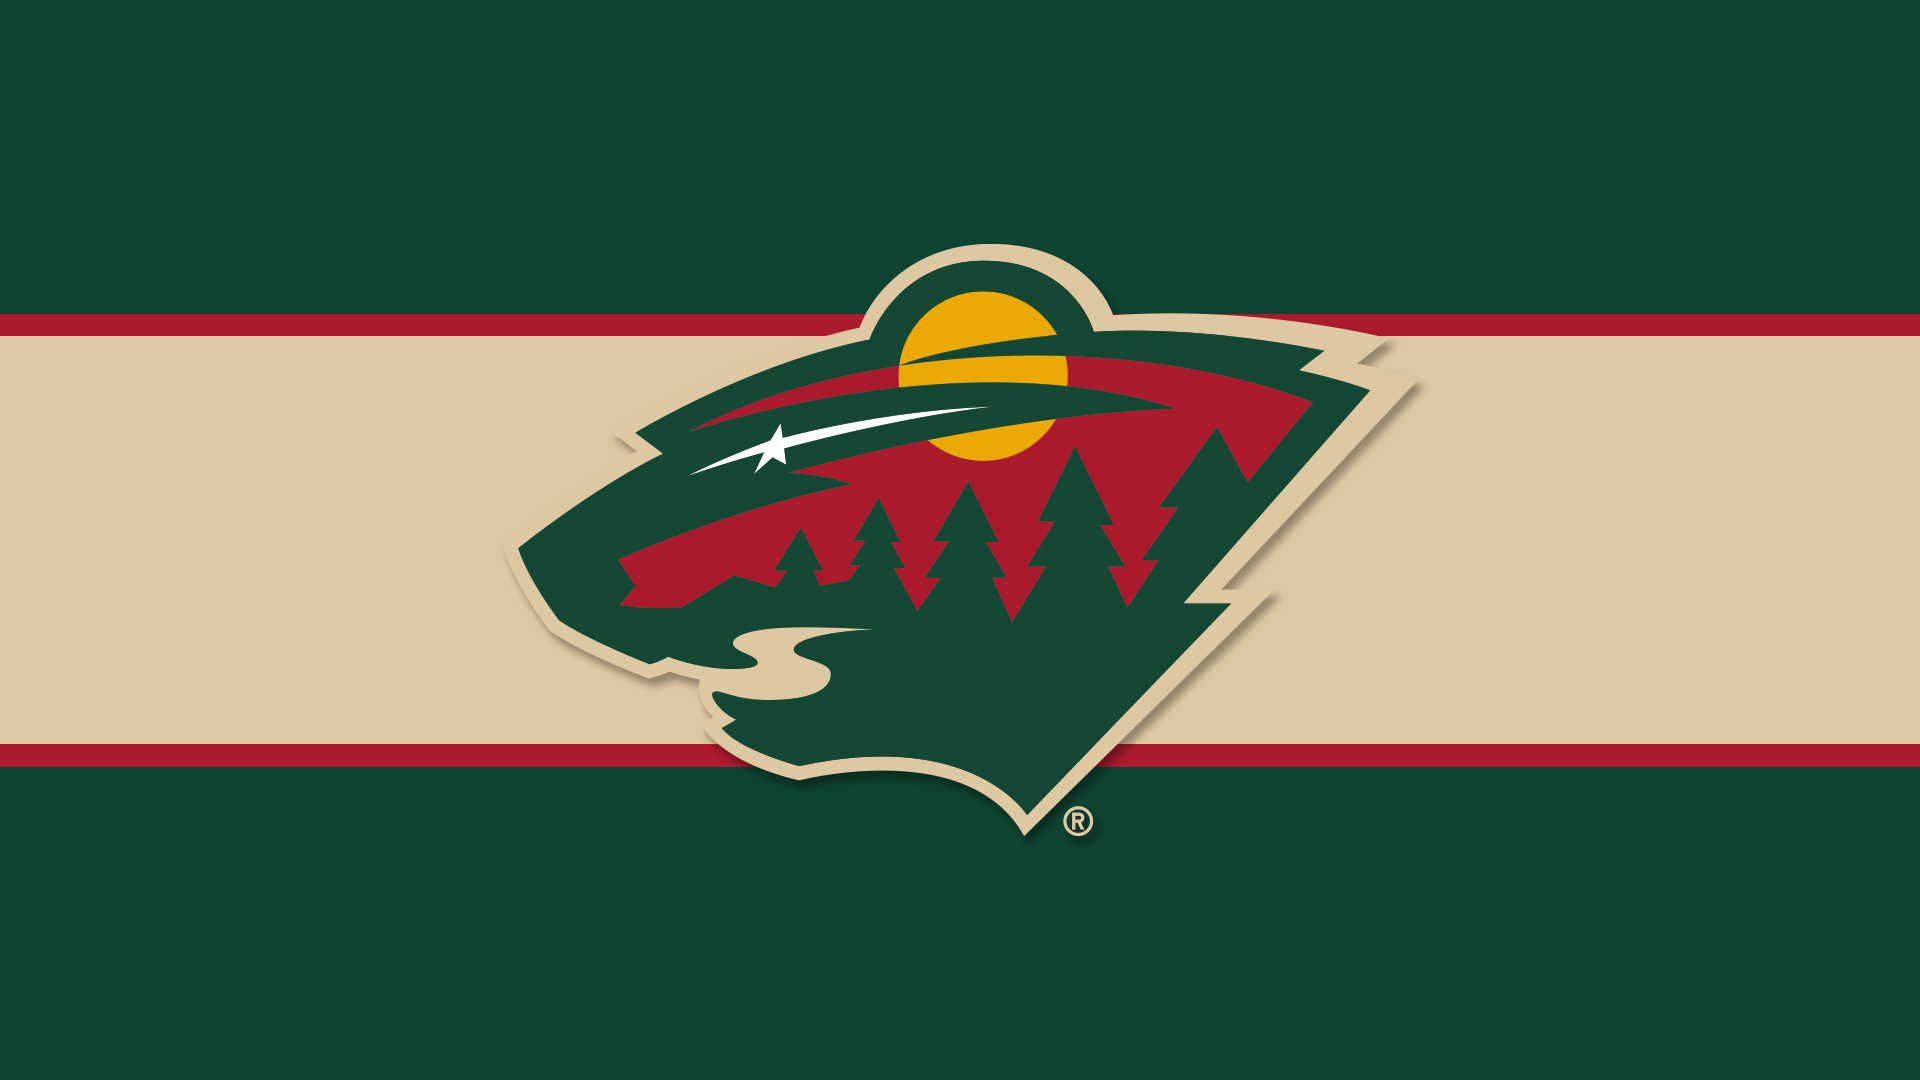 Minnesota wild on new conference call meeting backgrounds ð mnwild wallpaperwednesday httpstcoarswpxdby